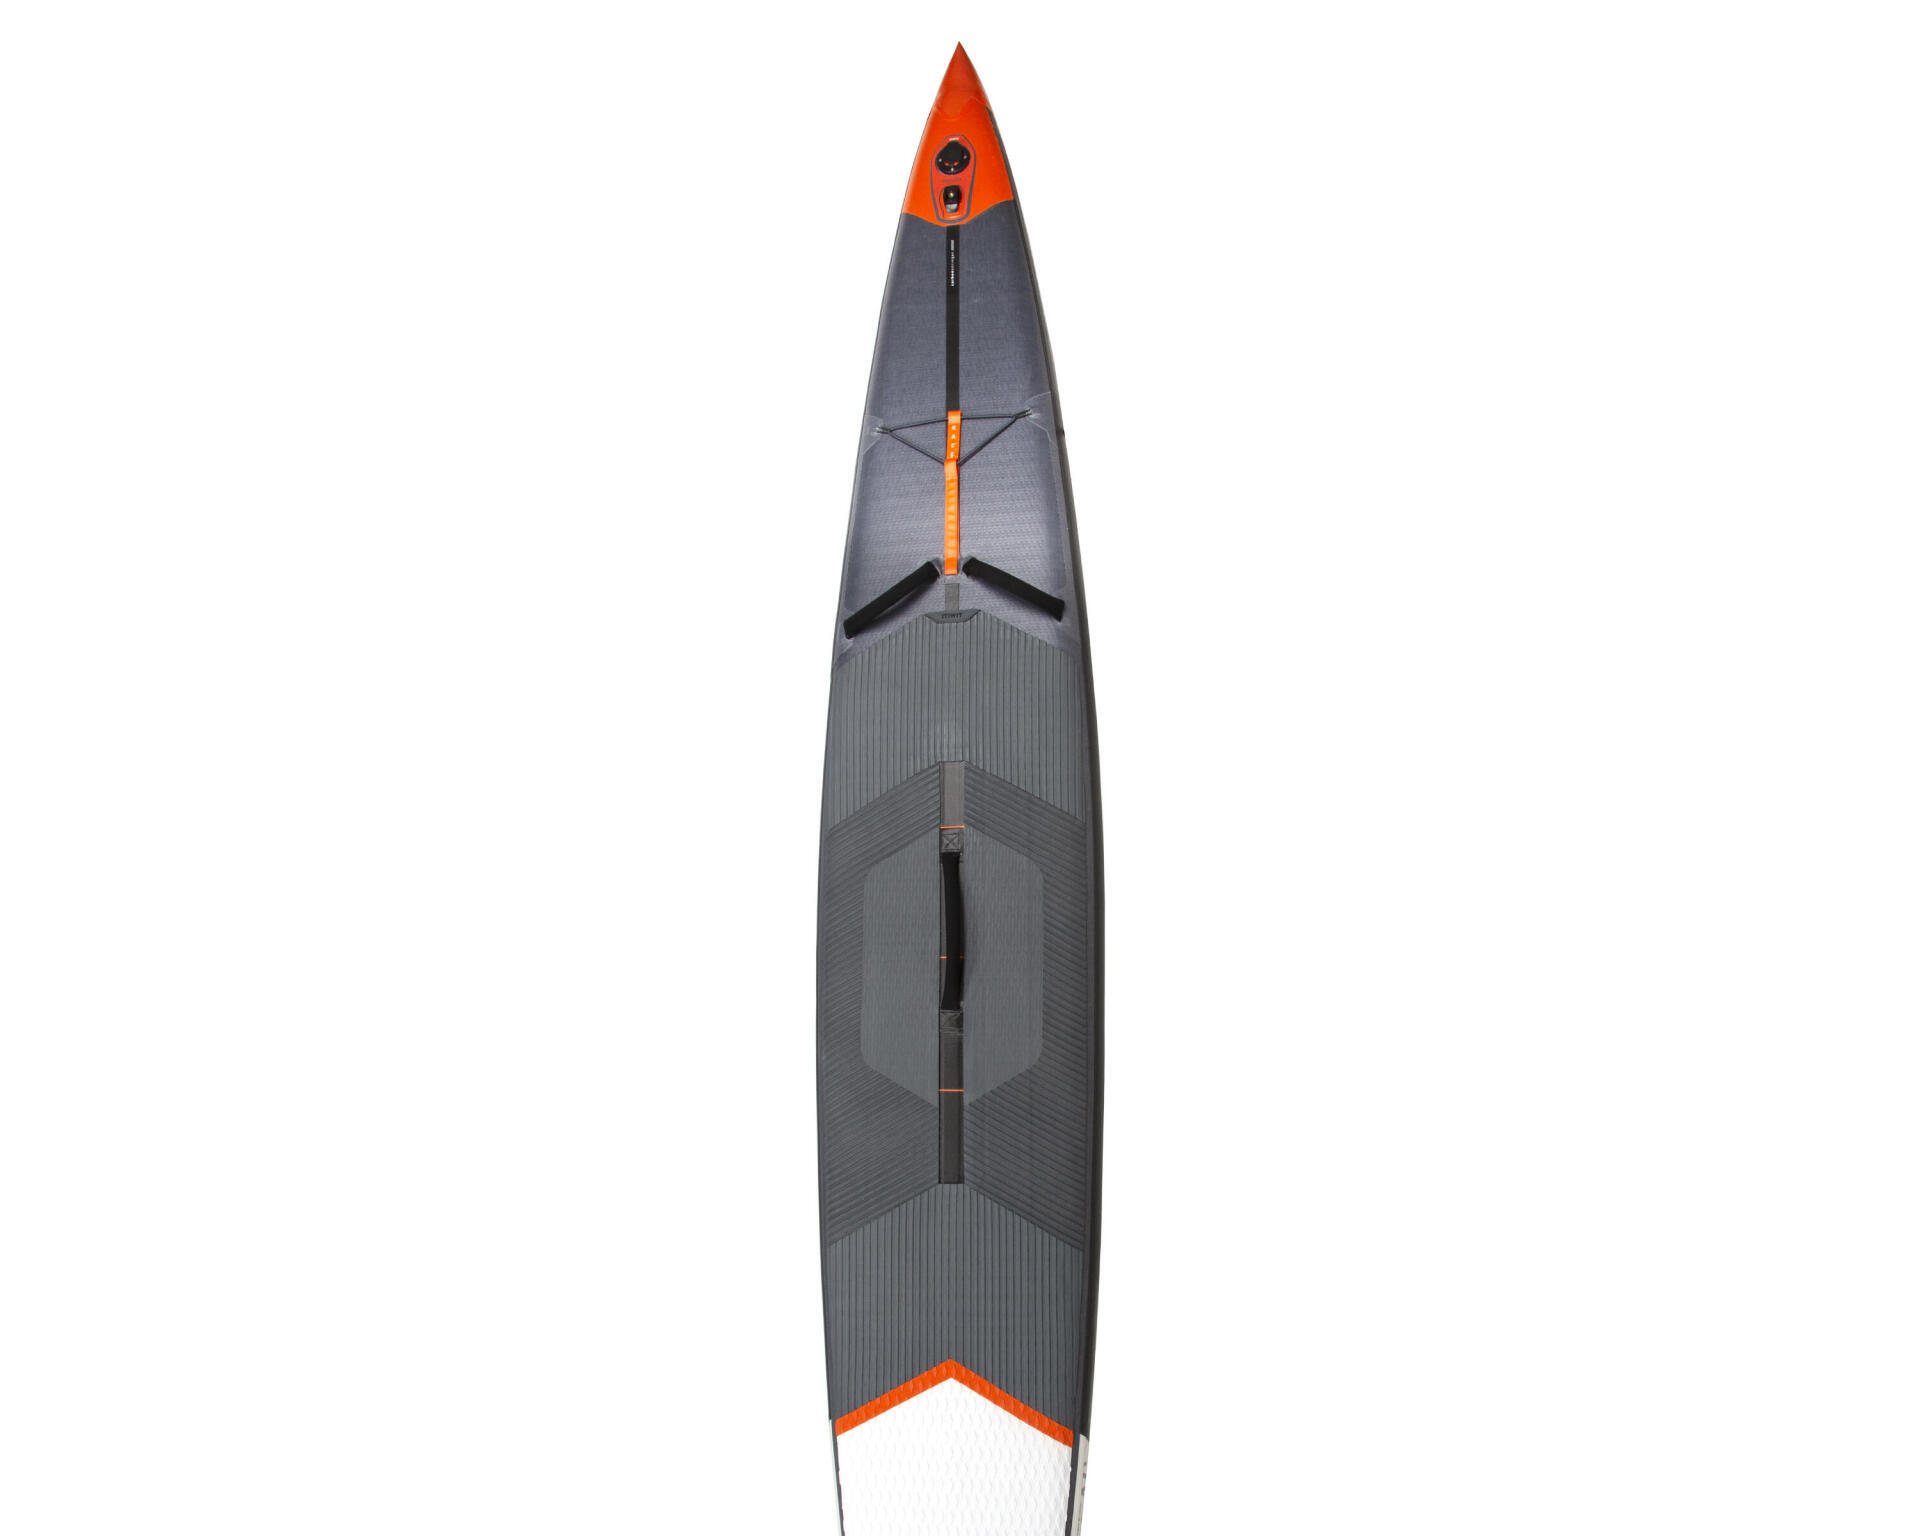 technical features of your stand-up paddle board